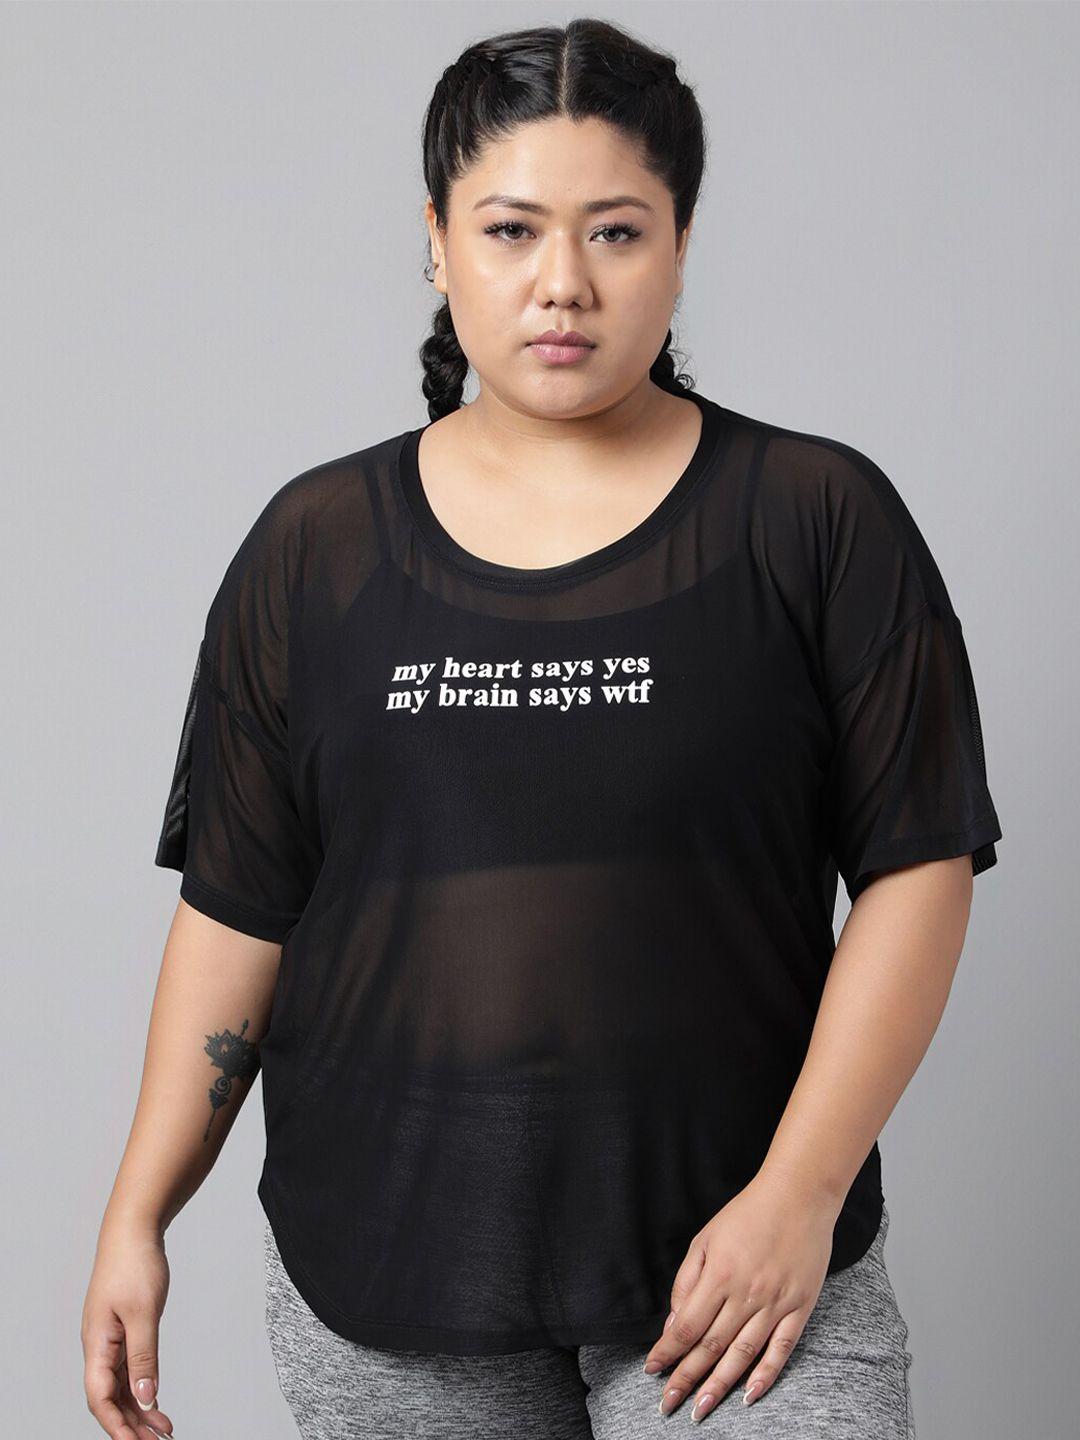 mkh plus size relaxed fit typography printed dri-fit technology semi sheer sports t-shirt